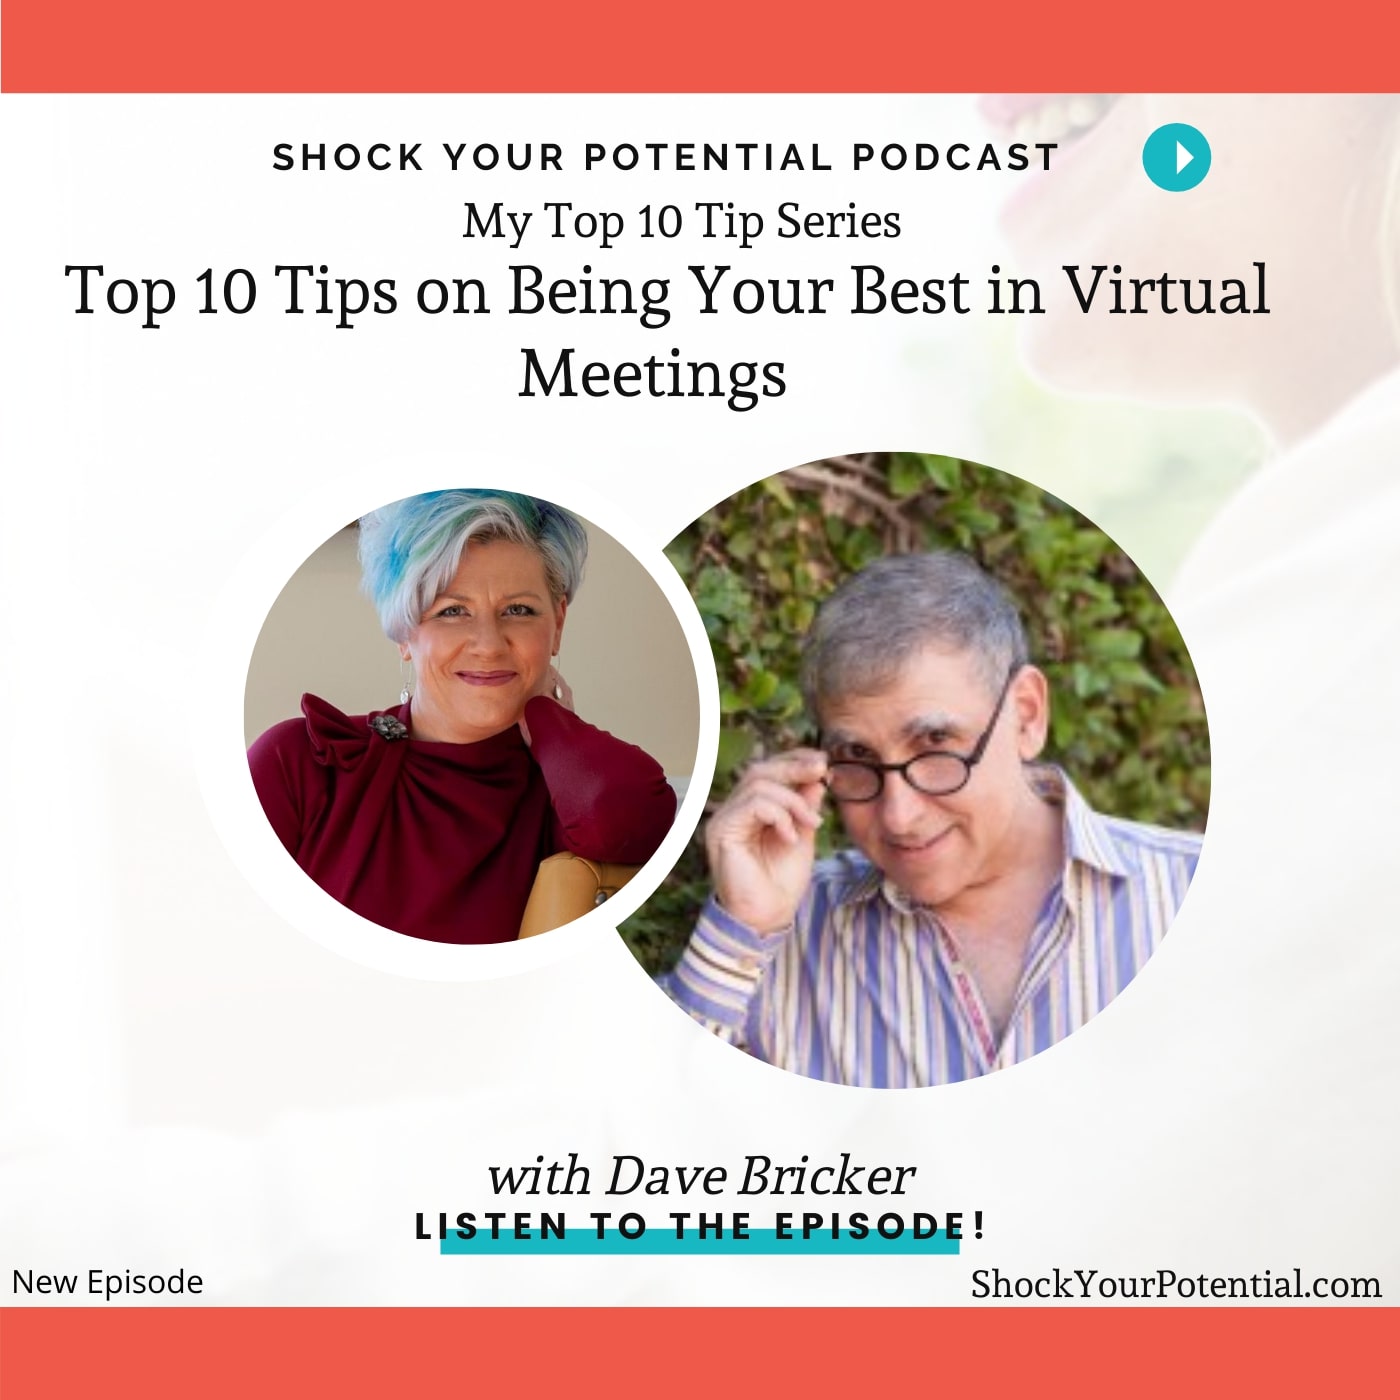 Top 10 Tips on Being Your Best in Virtual Meetings – Dave Bricker